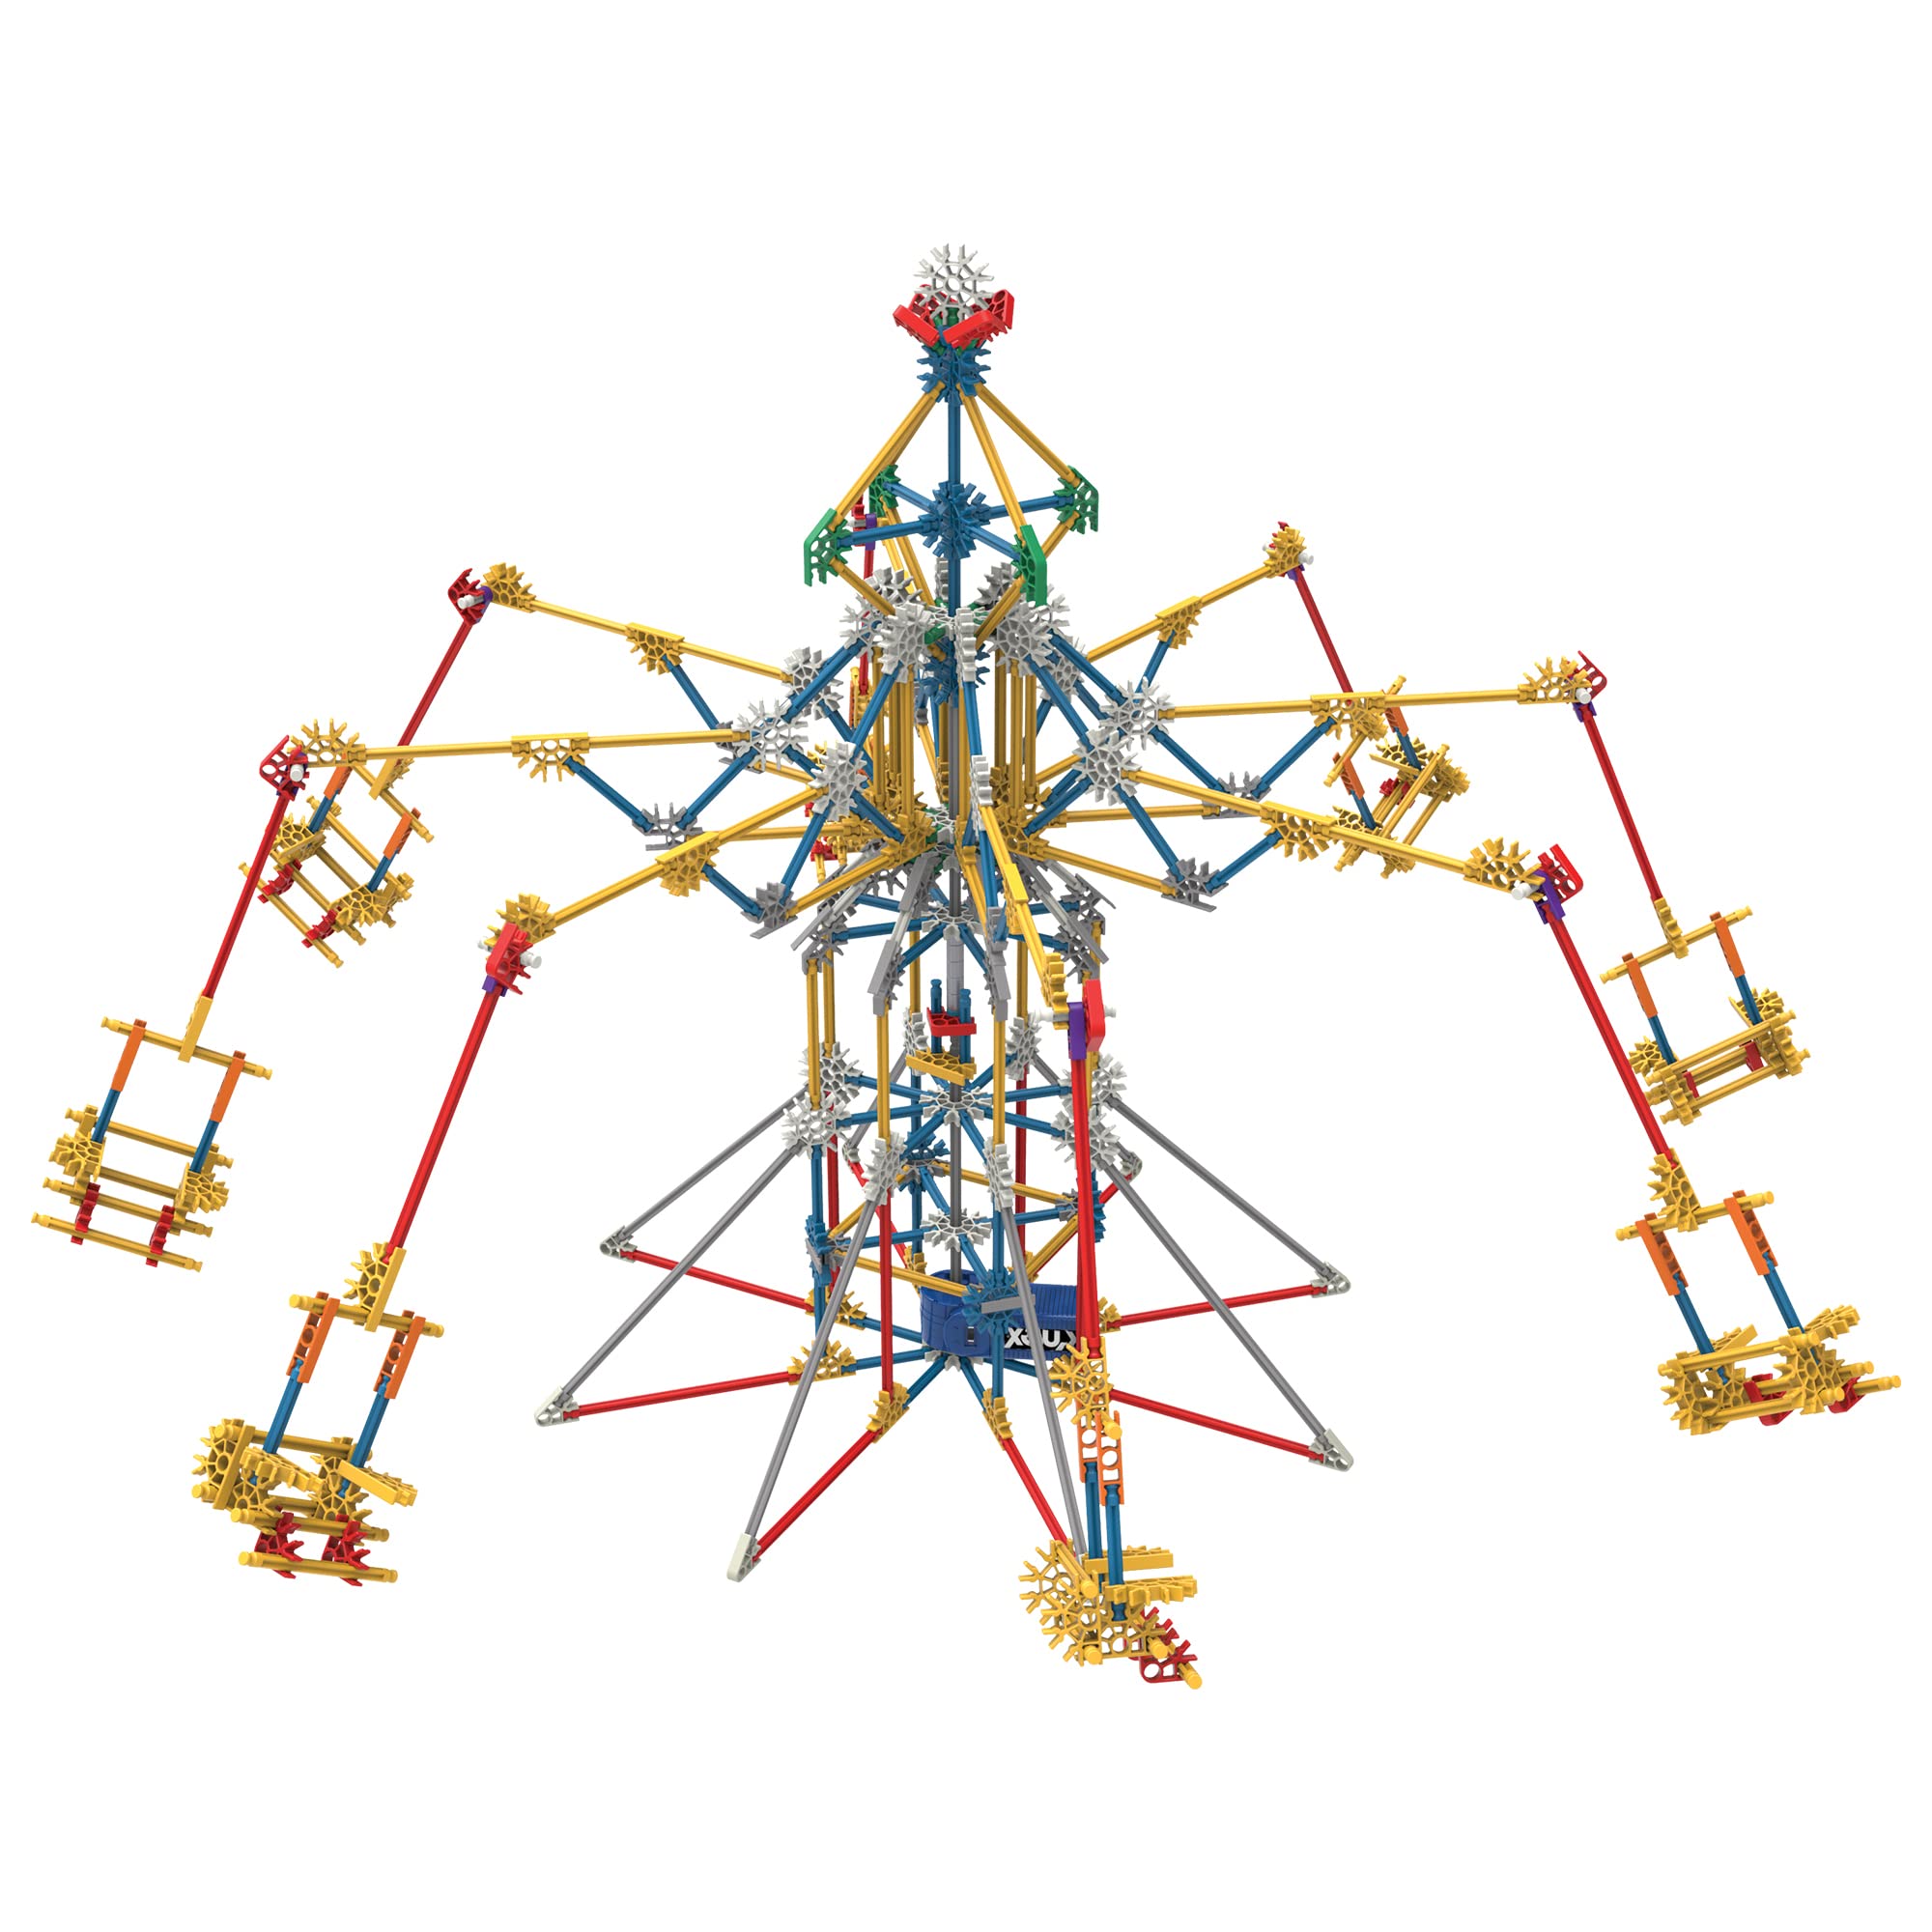 K'NEX Thrill Rides - 3-in-1 Classic Amusement Park Building Set, for 9 - 15 years, Includes 744 Construction Components, Instructions, Multicolor